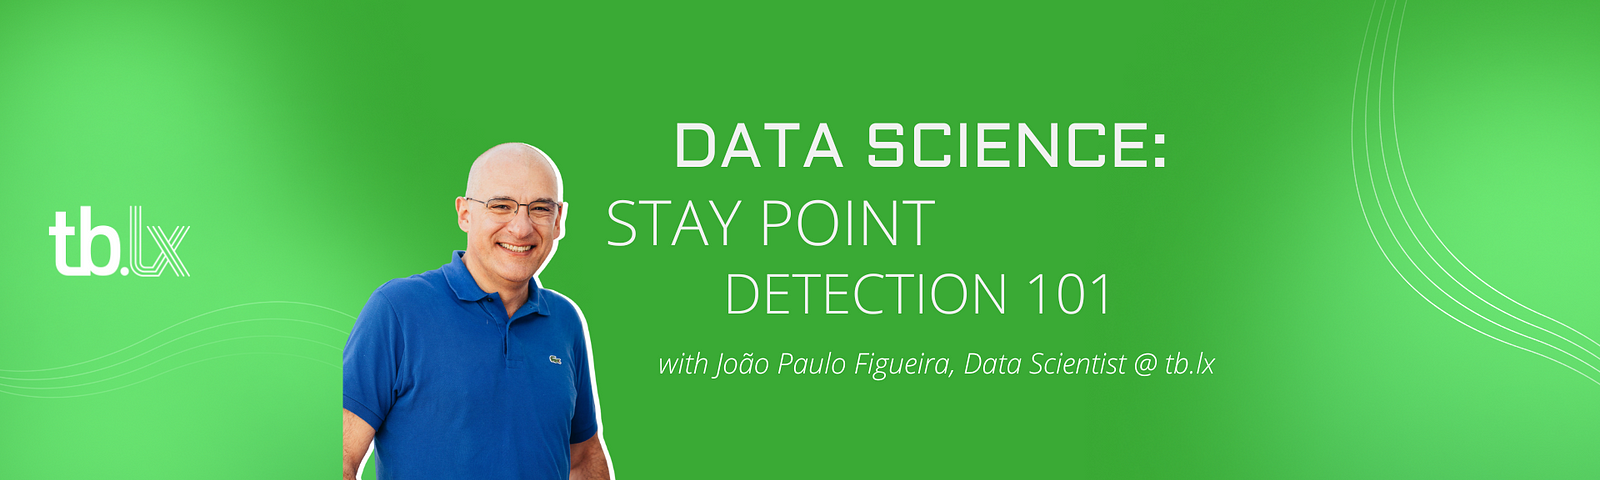 Portrait of João Paulo Figueira smiling with the title” Data Science: Stay Point Detection 101" with João Paulo Figueira, Data Scientist @ tb.lx